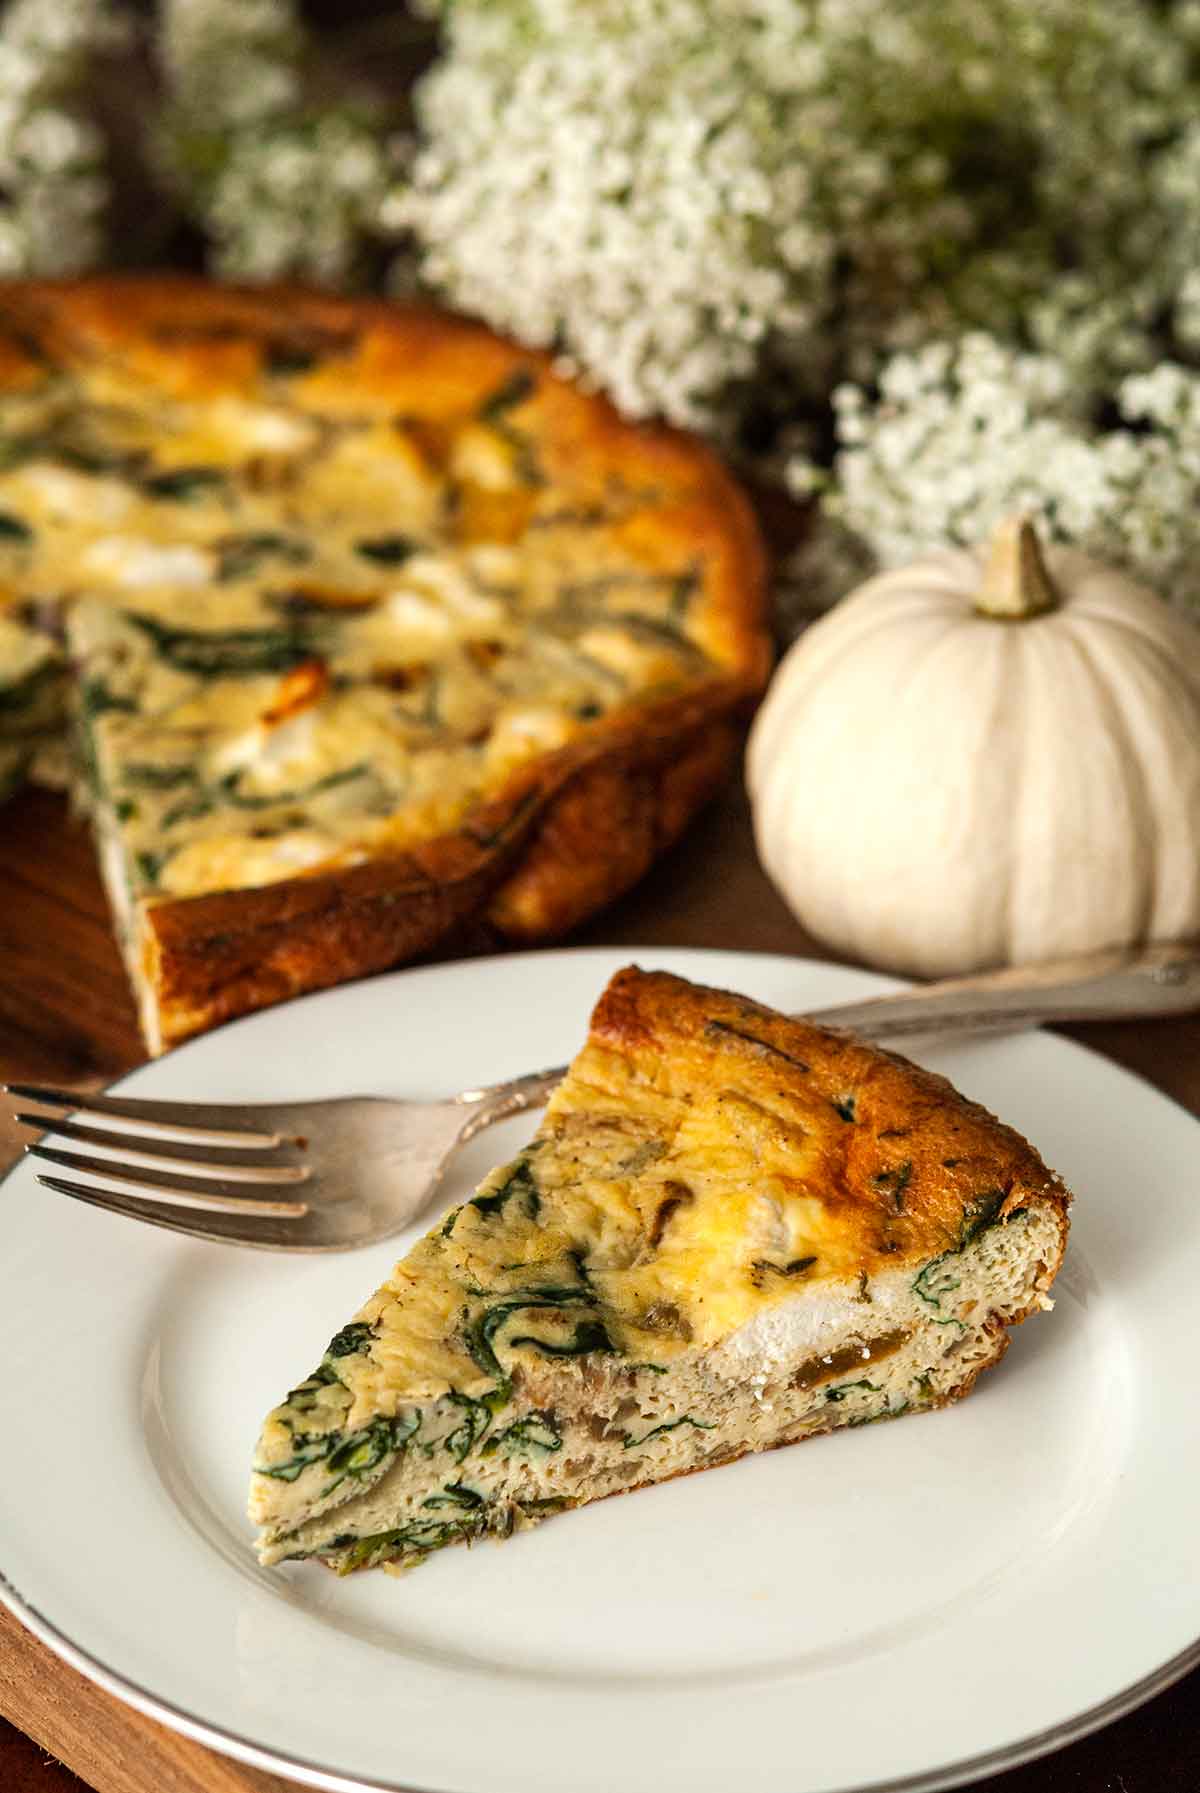 A slice of quiche on a plate with a fork, in front of flowers, a pumpkin gourd and quiche.